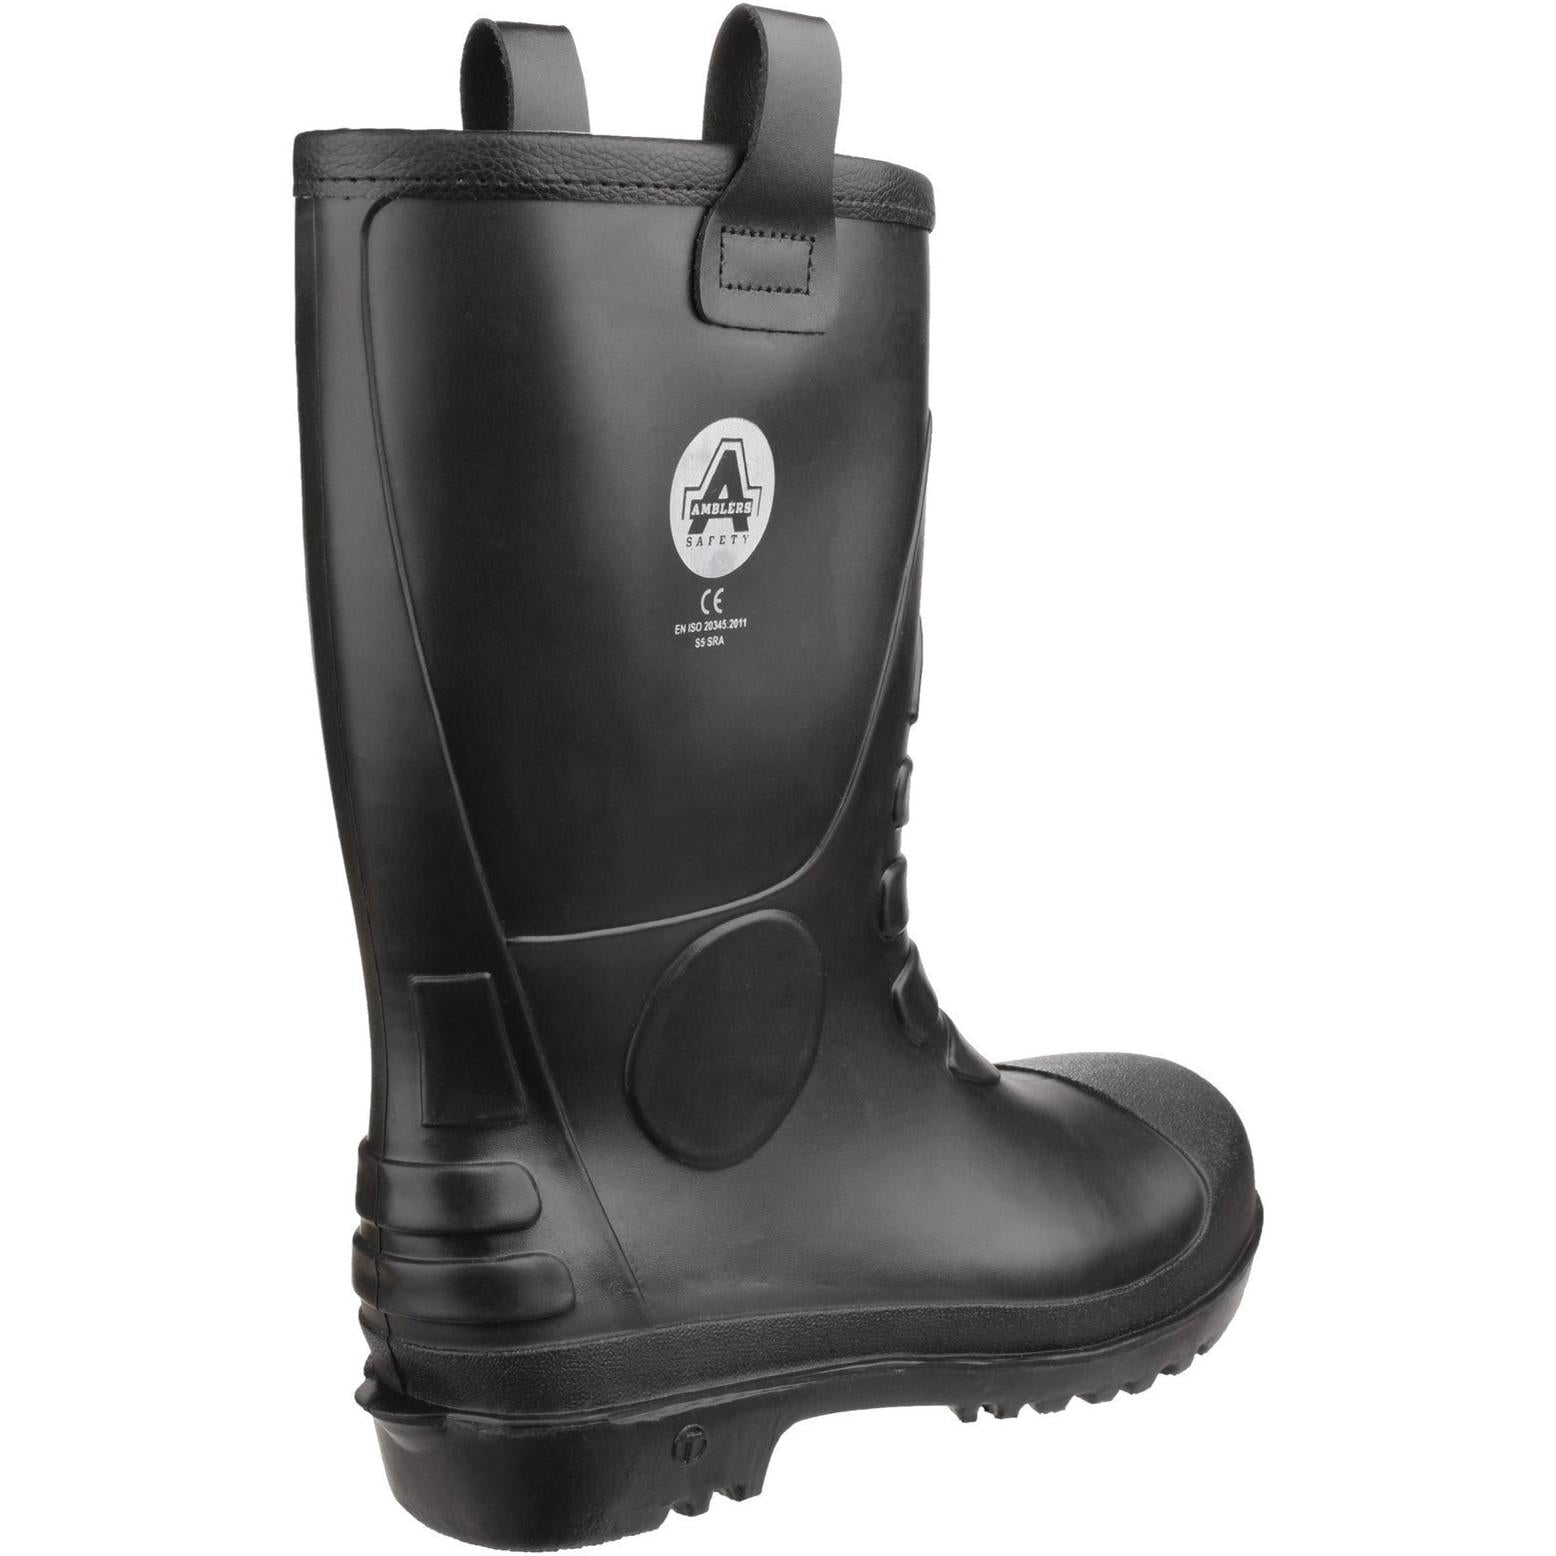 Amblers Safety FS90 Waterproof PVC Pull on Safety Rigger Boot